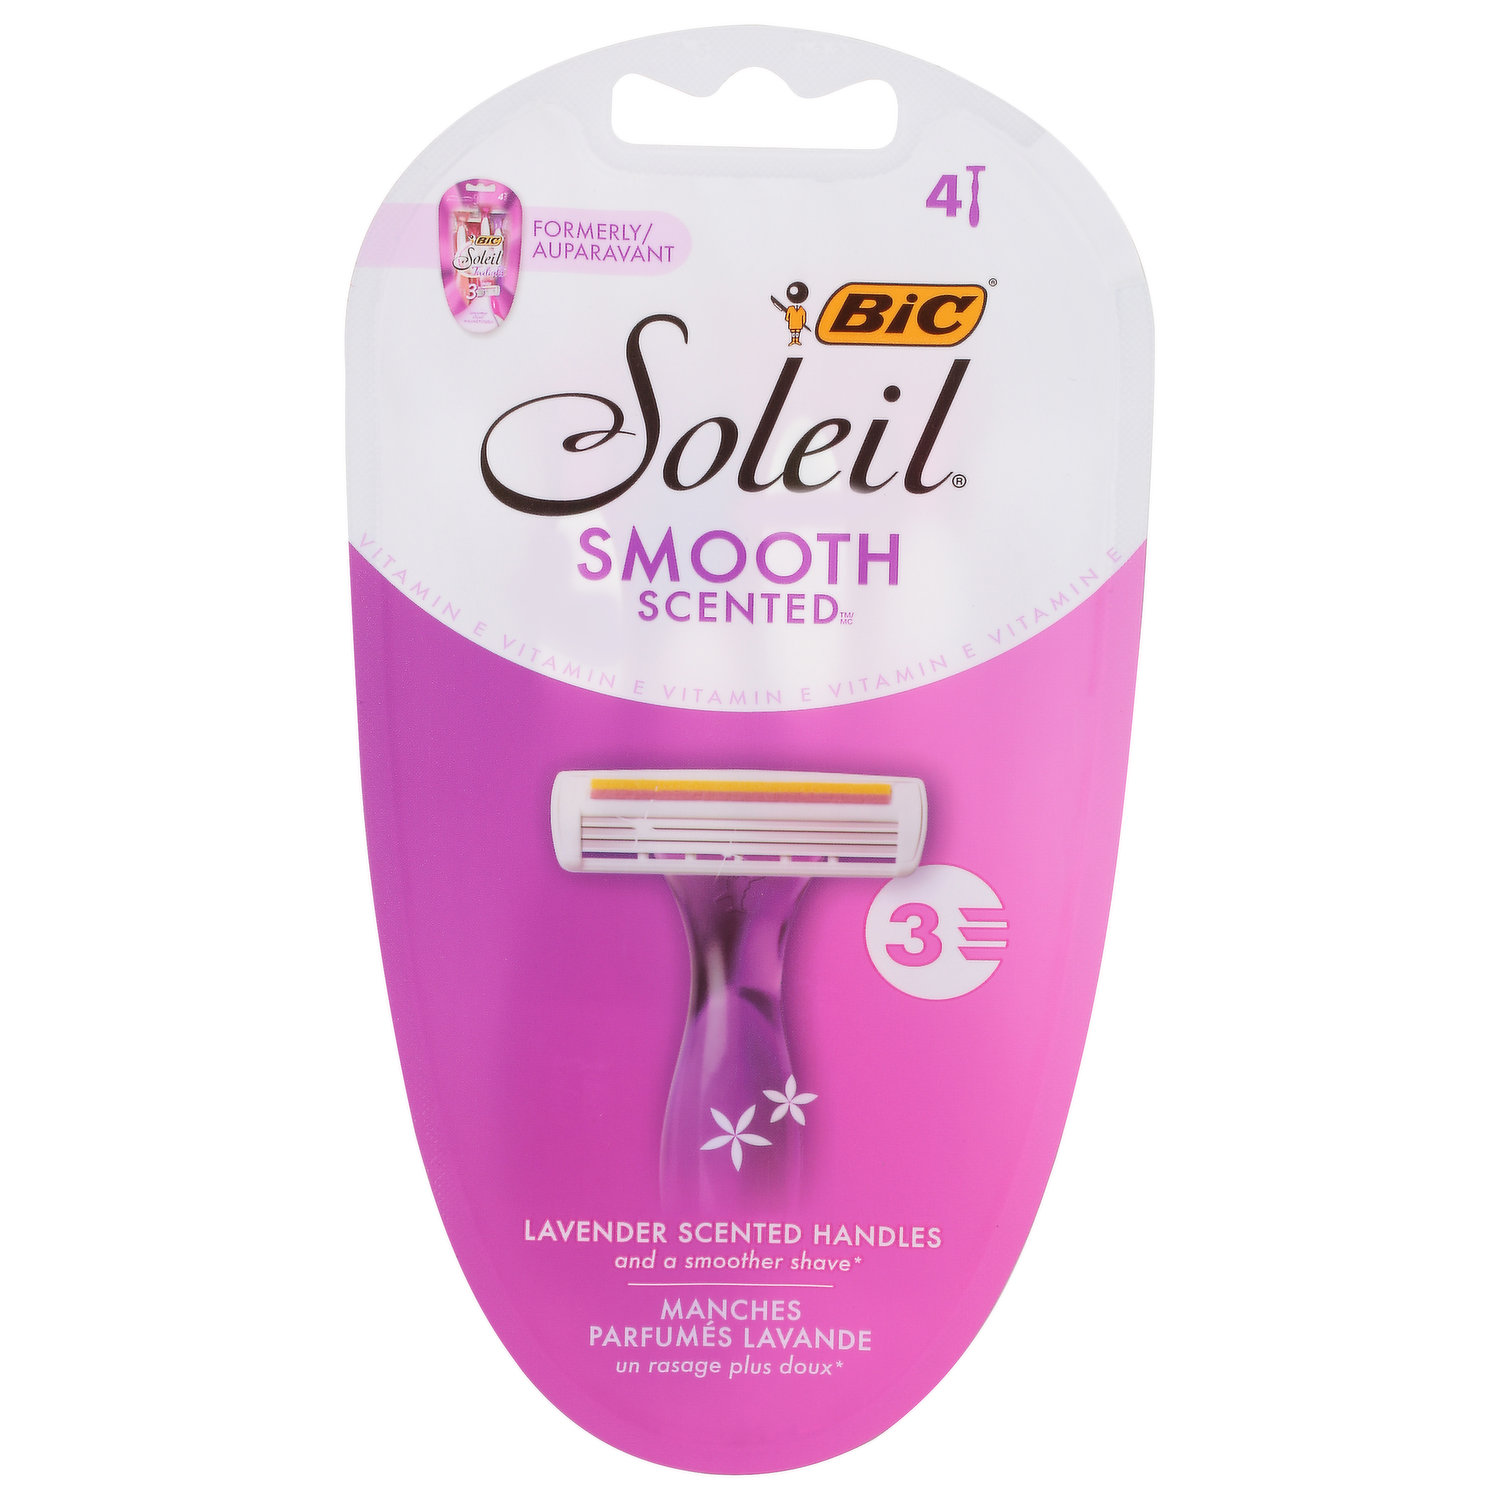 BIC Soleil Colour Collection Sensitive Skin Women's Disposable Razors,  3-Blade, 8-Count, Lubricating Strip with Aloe and Vitamin E for a Smooth  Glide, Pack of 8 